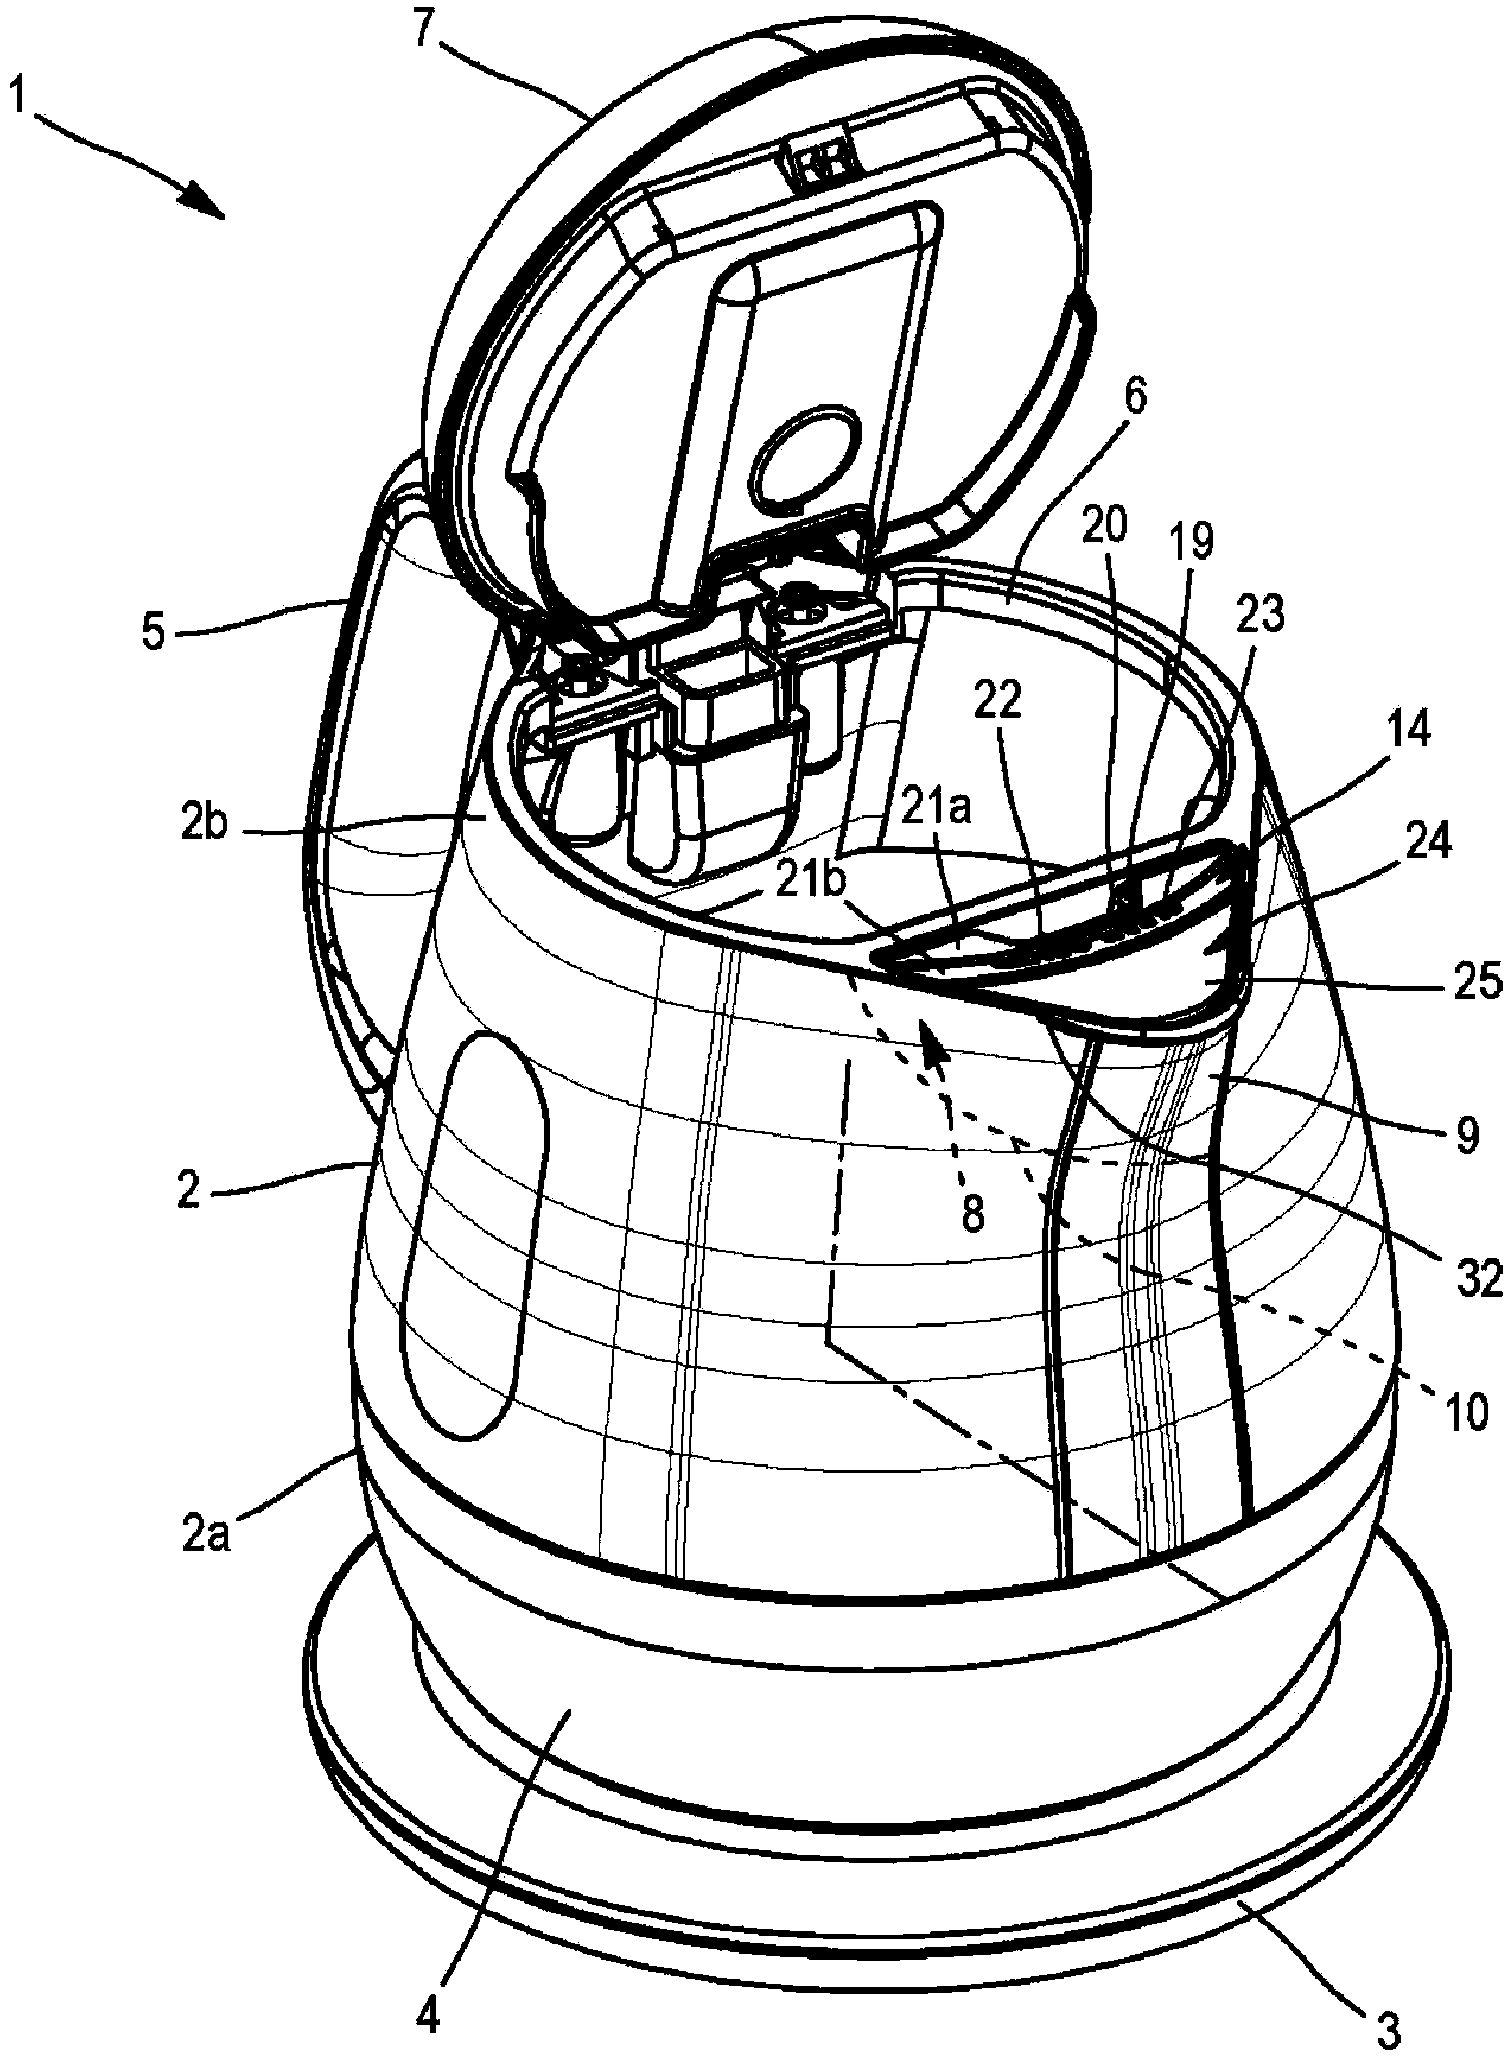 Kettle provided with a removable dust flap and filter assembly